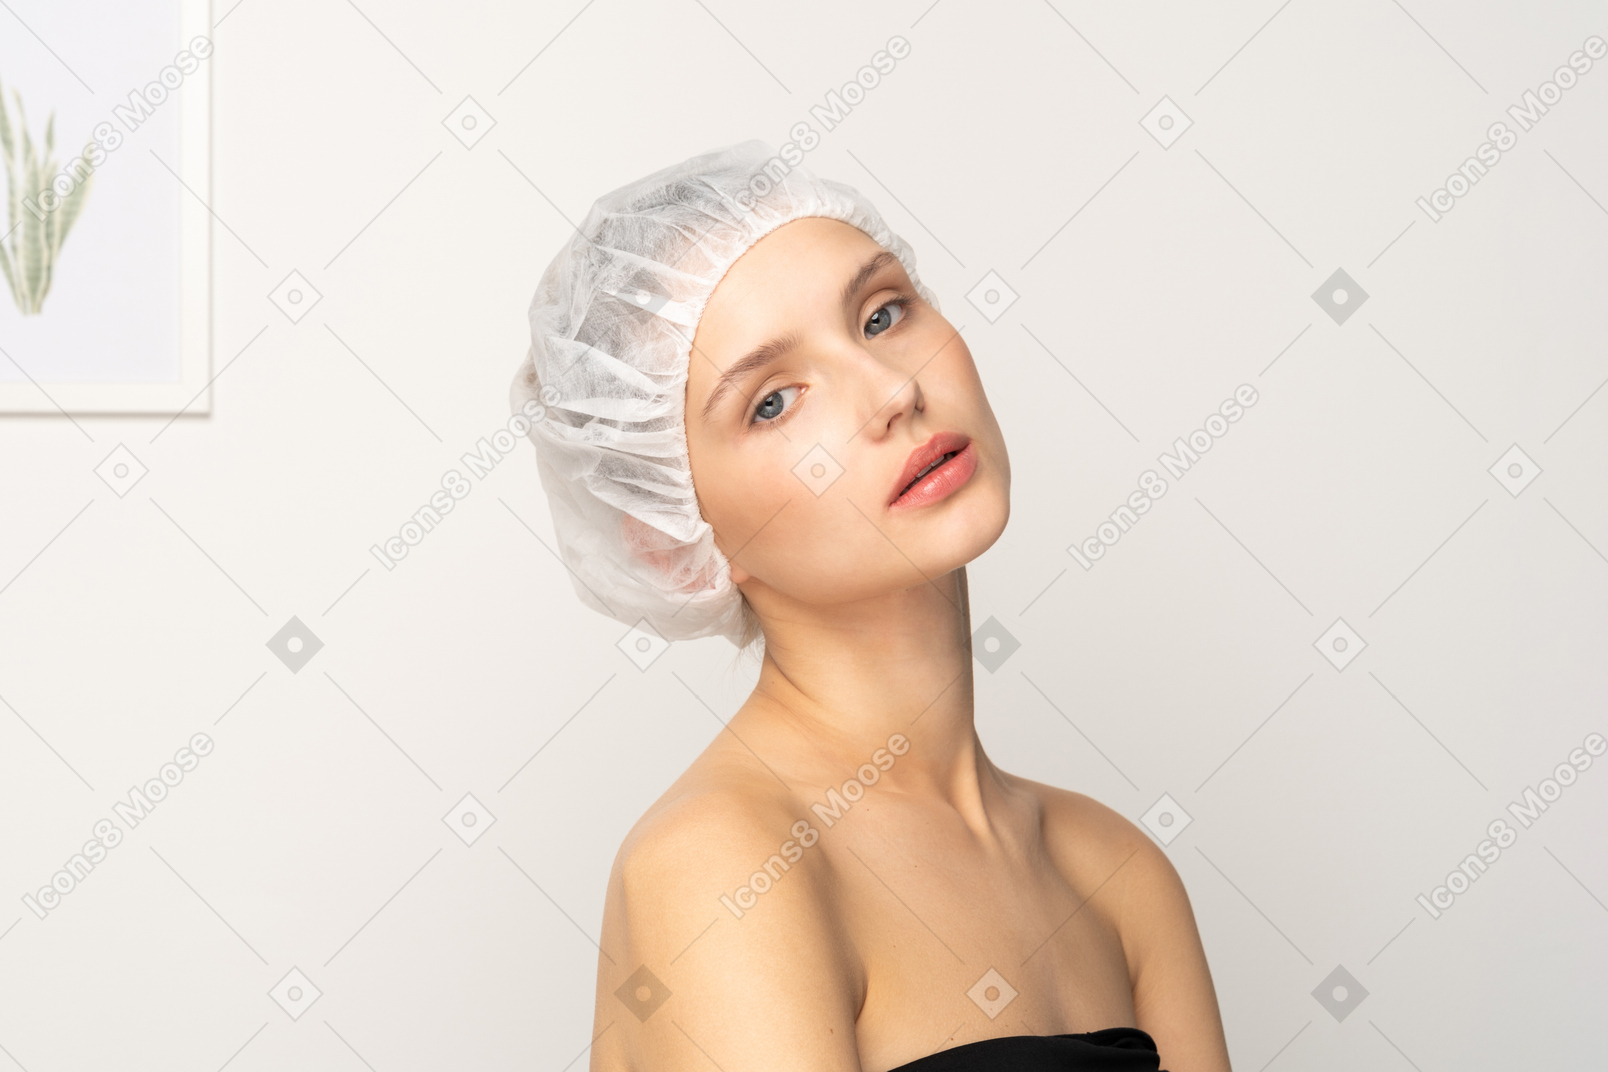 Portrait of a young attractive woman in medical cap